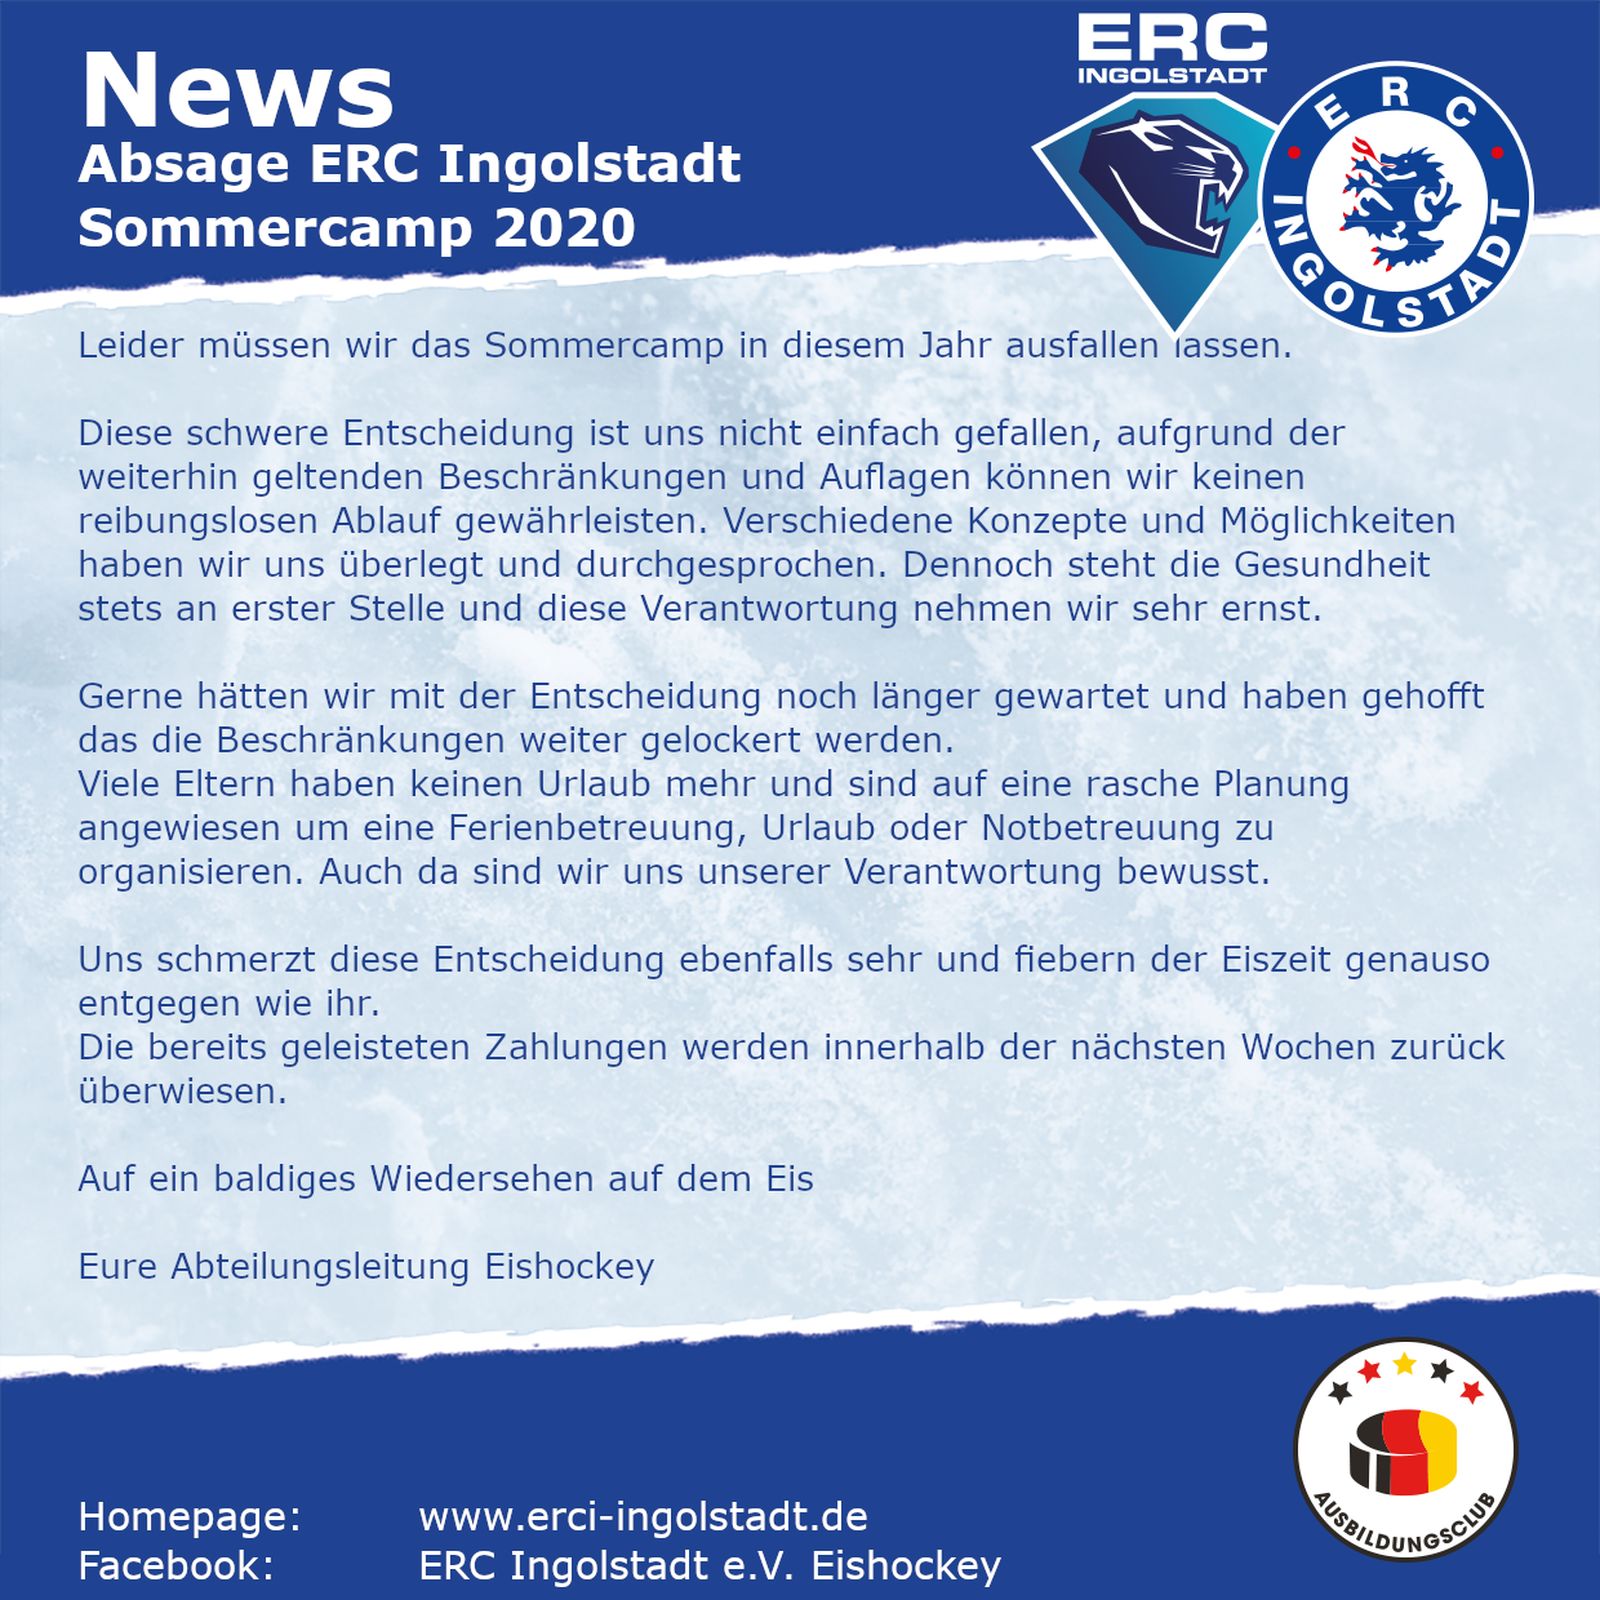 News Absage Sommercamp